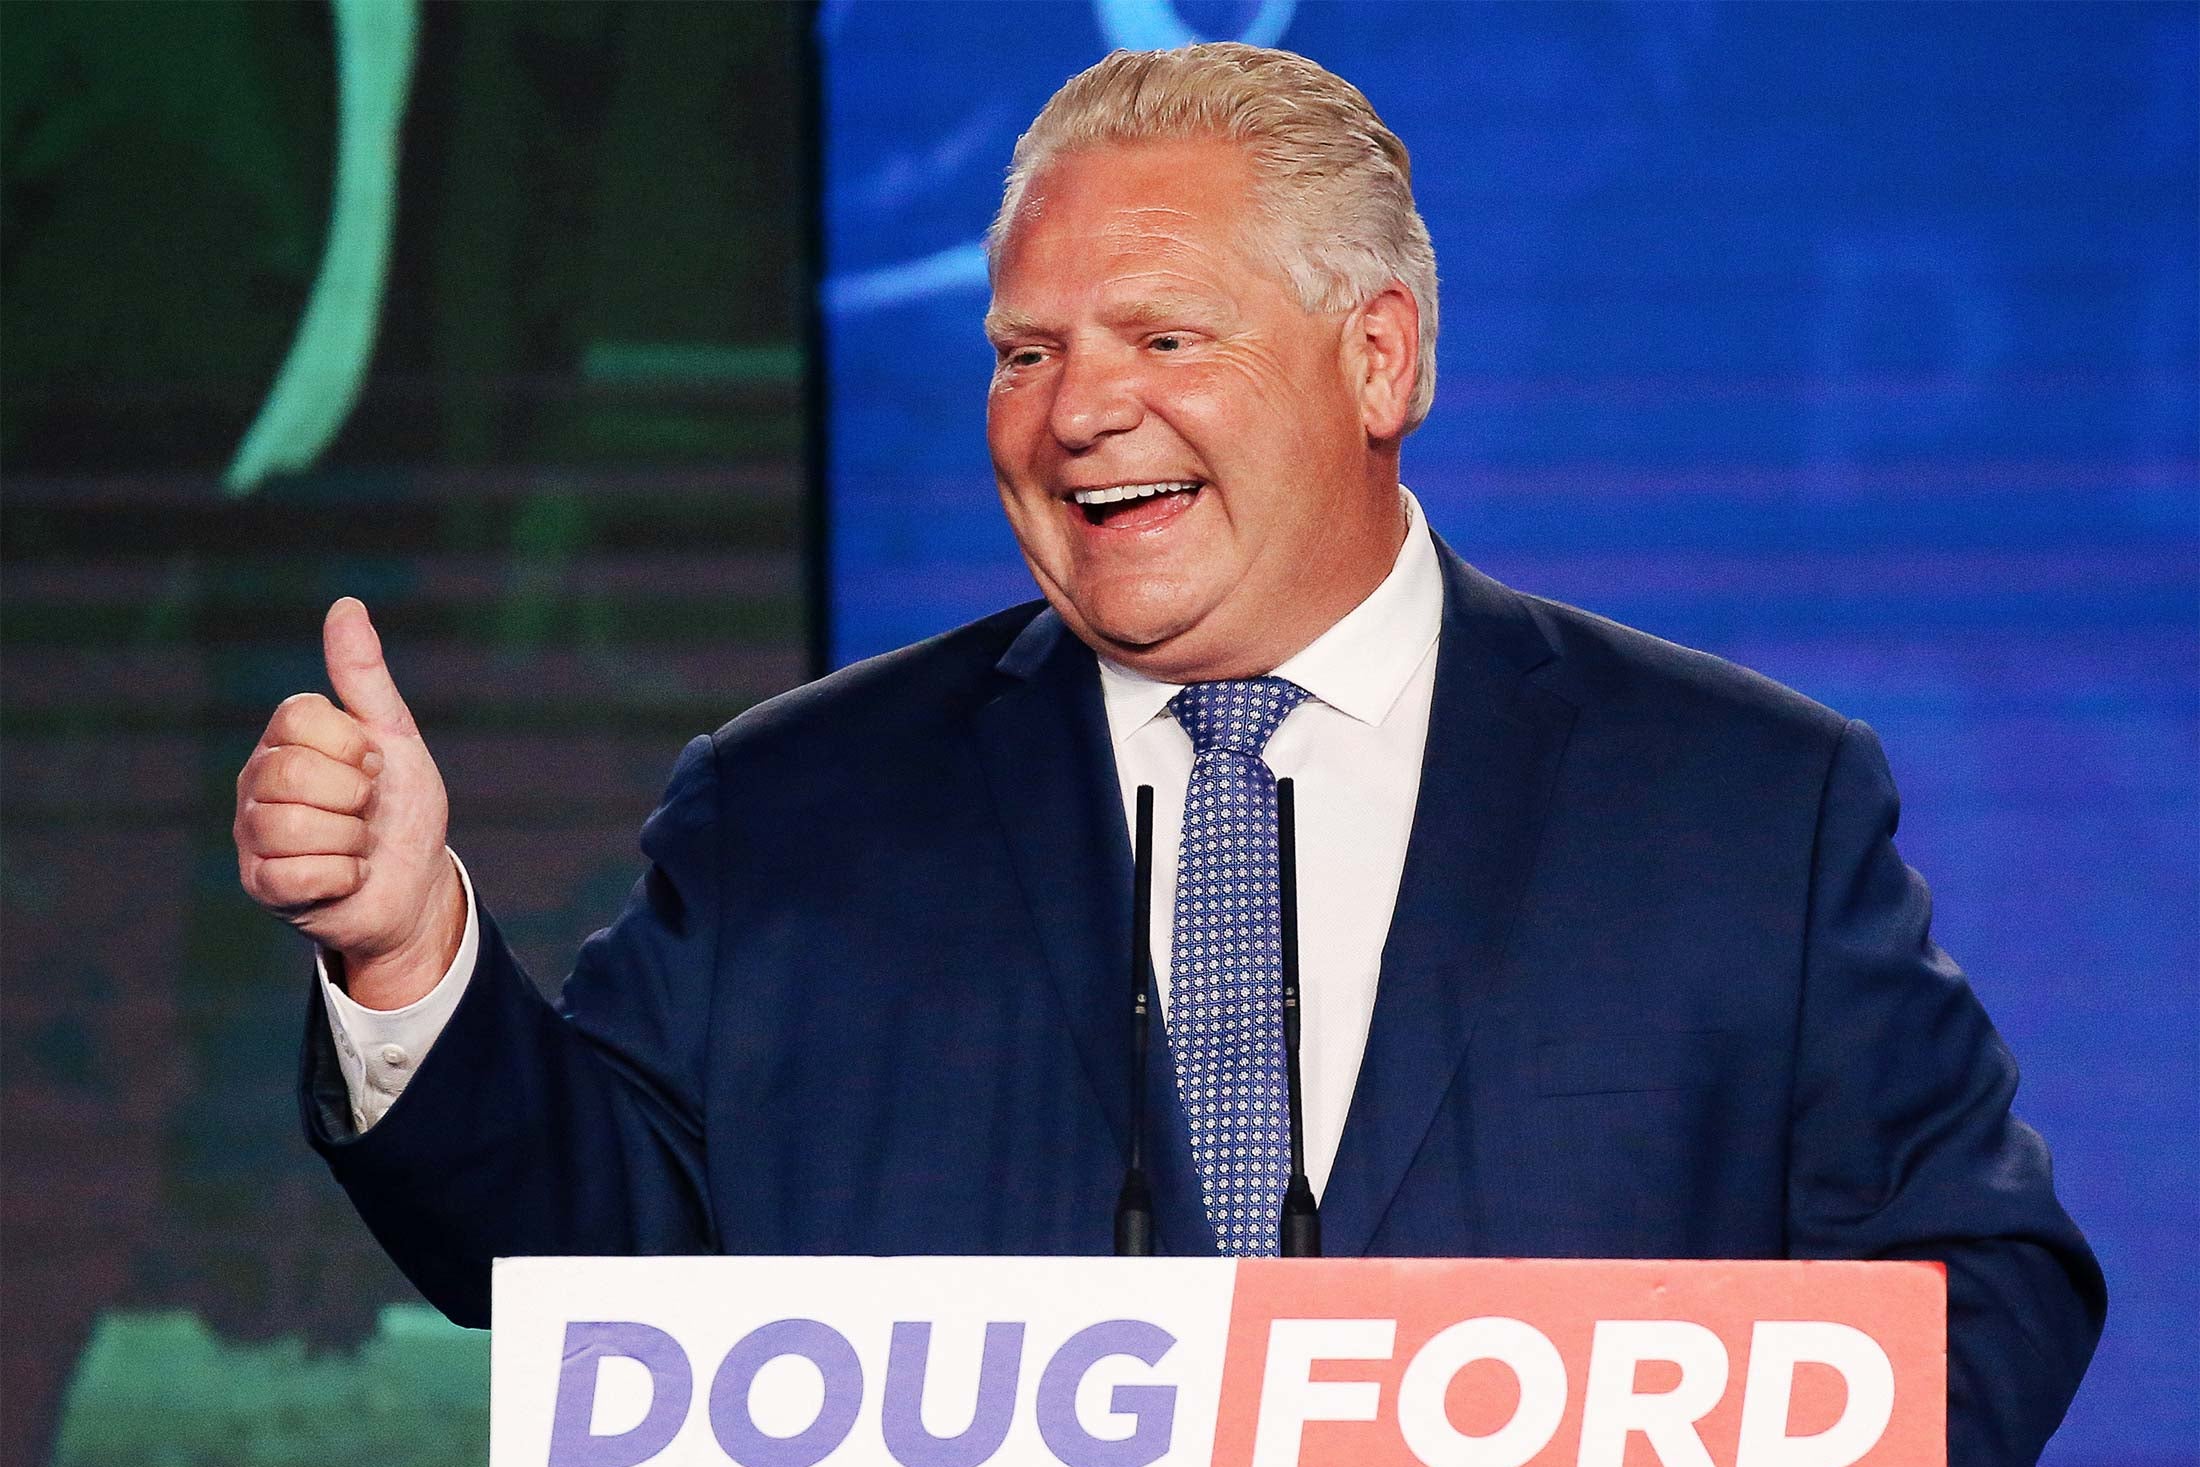 Doug Ford gives a thumbs-up during his election night party following the provincial election in Toronto, Ontario, on Thursday.